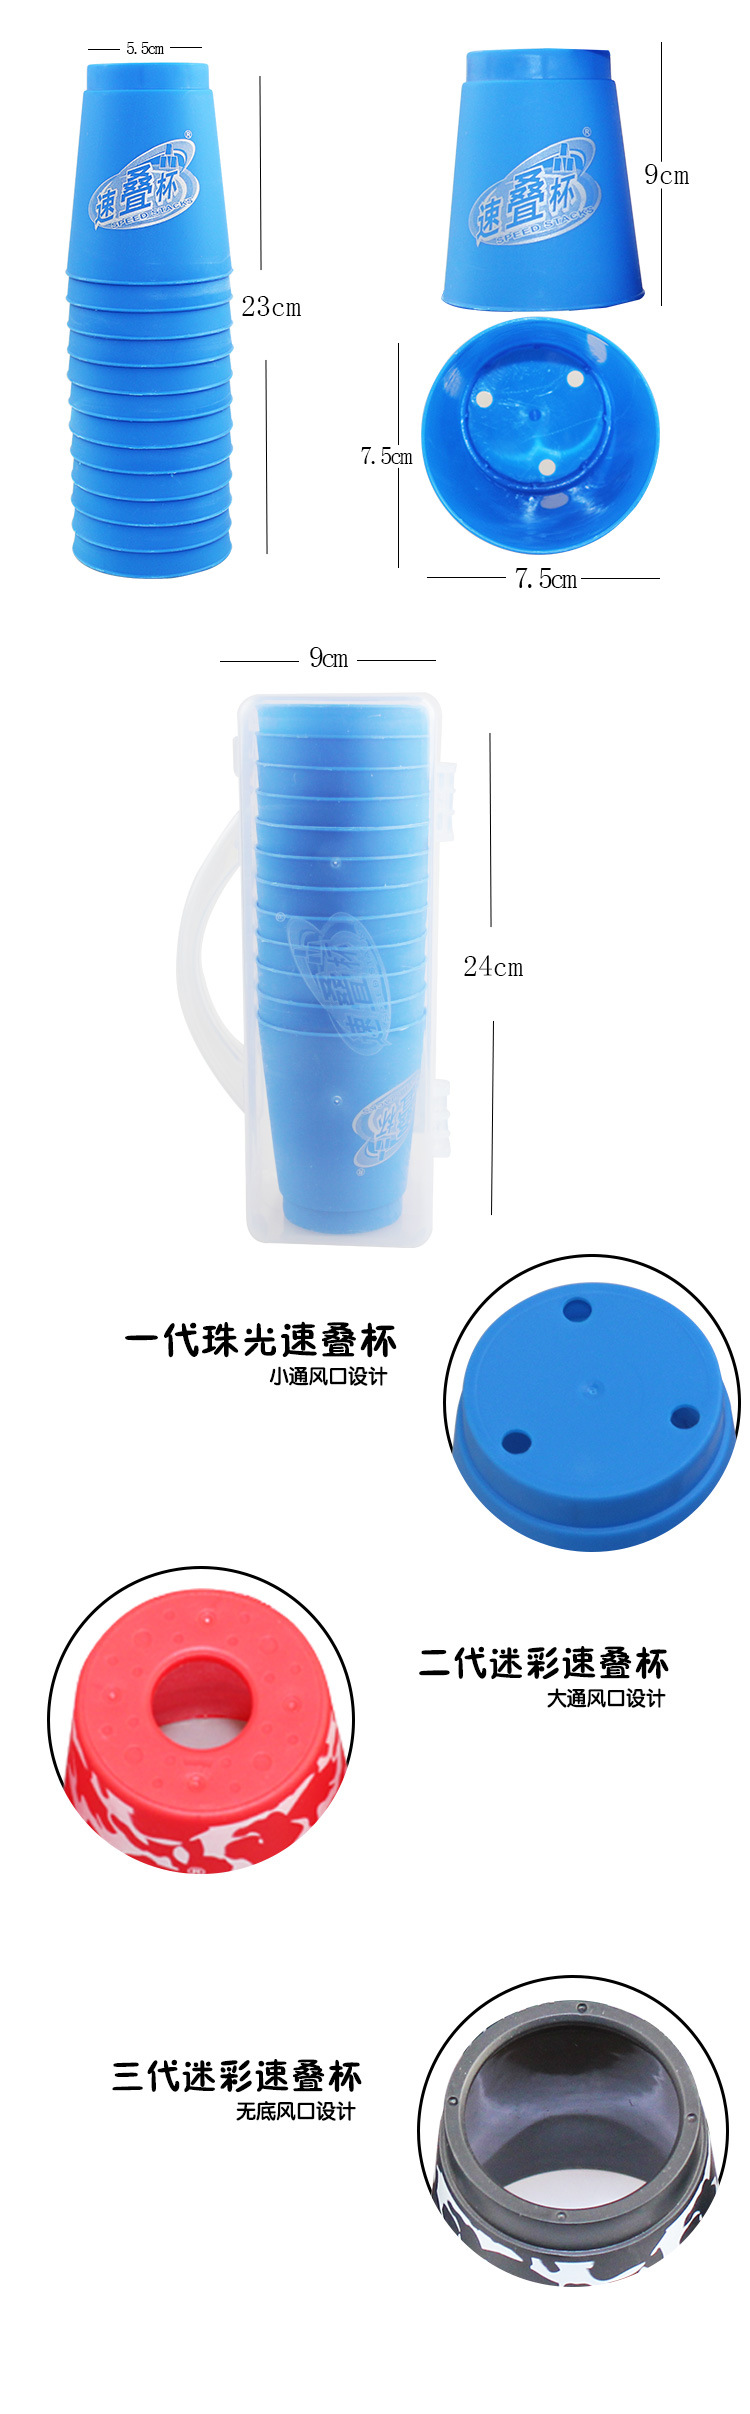 Yu Xin 2 generation of camouflage, superposition cup, folding cup, PP hand-held boxed toys4